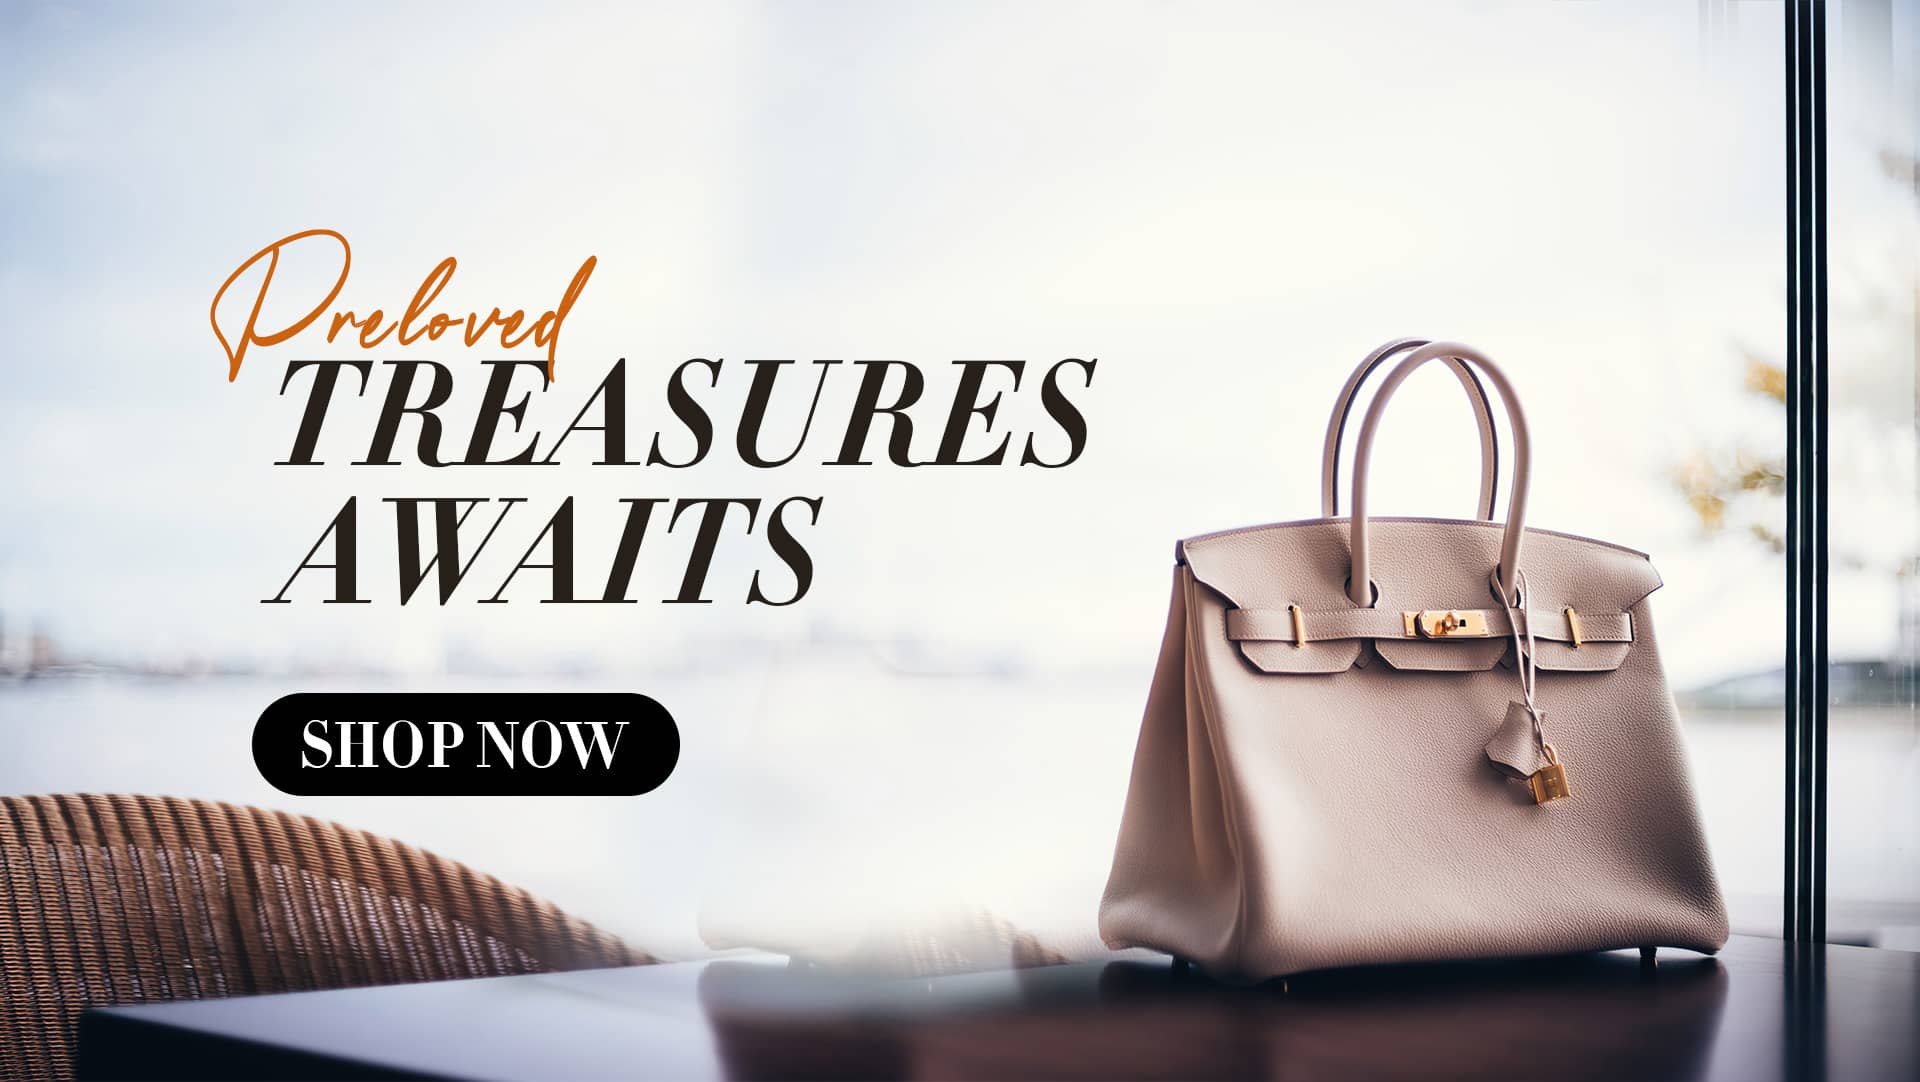 Senreve Handbag Revival Sale — Up to 70% Off New and Used Purses